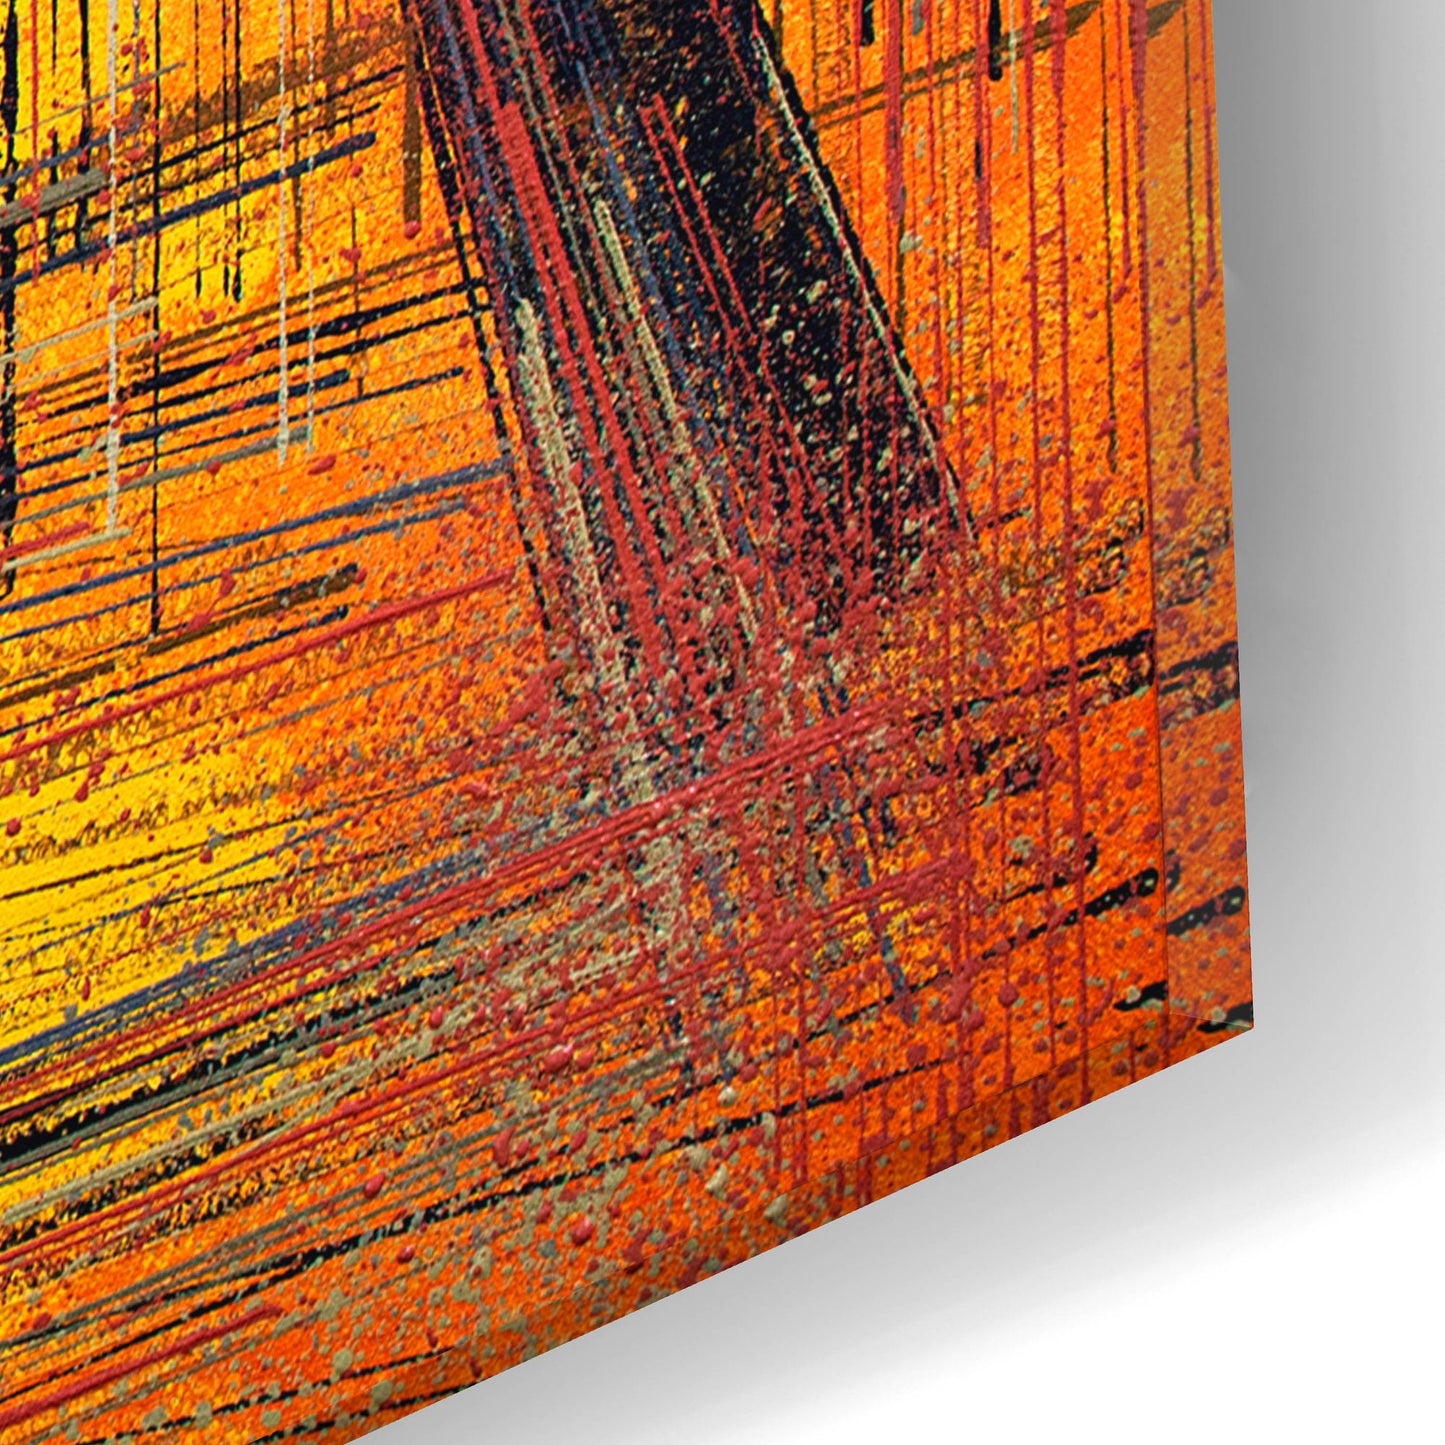 Epic Art 'Trees In A Golden Glow' by Marc Todd, Acrylic Glass Wall Art,16x12